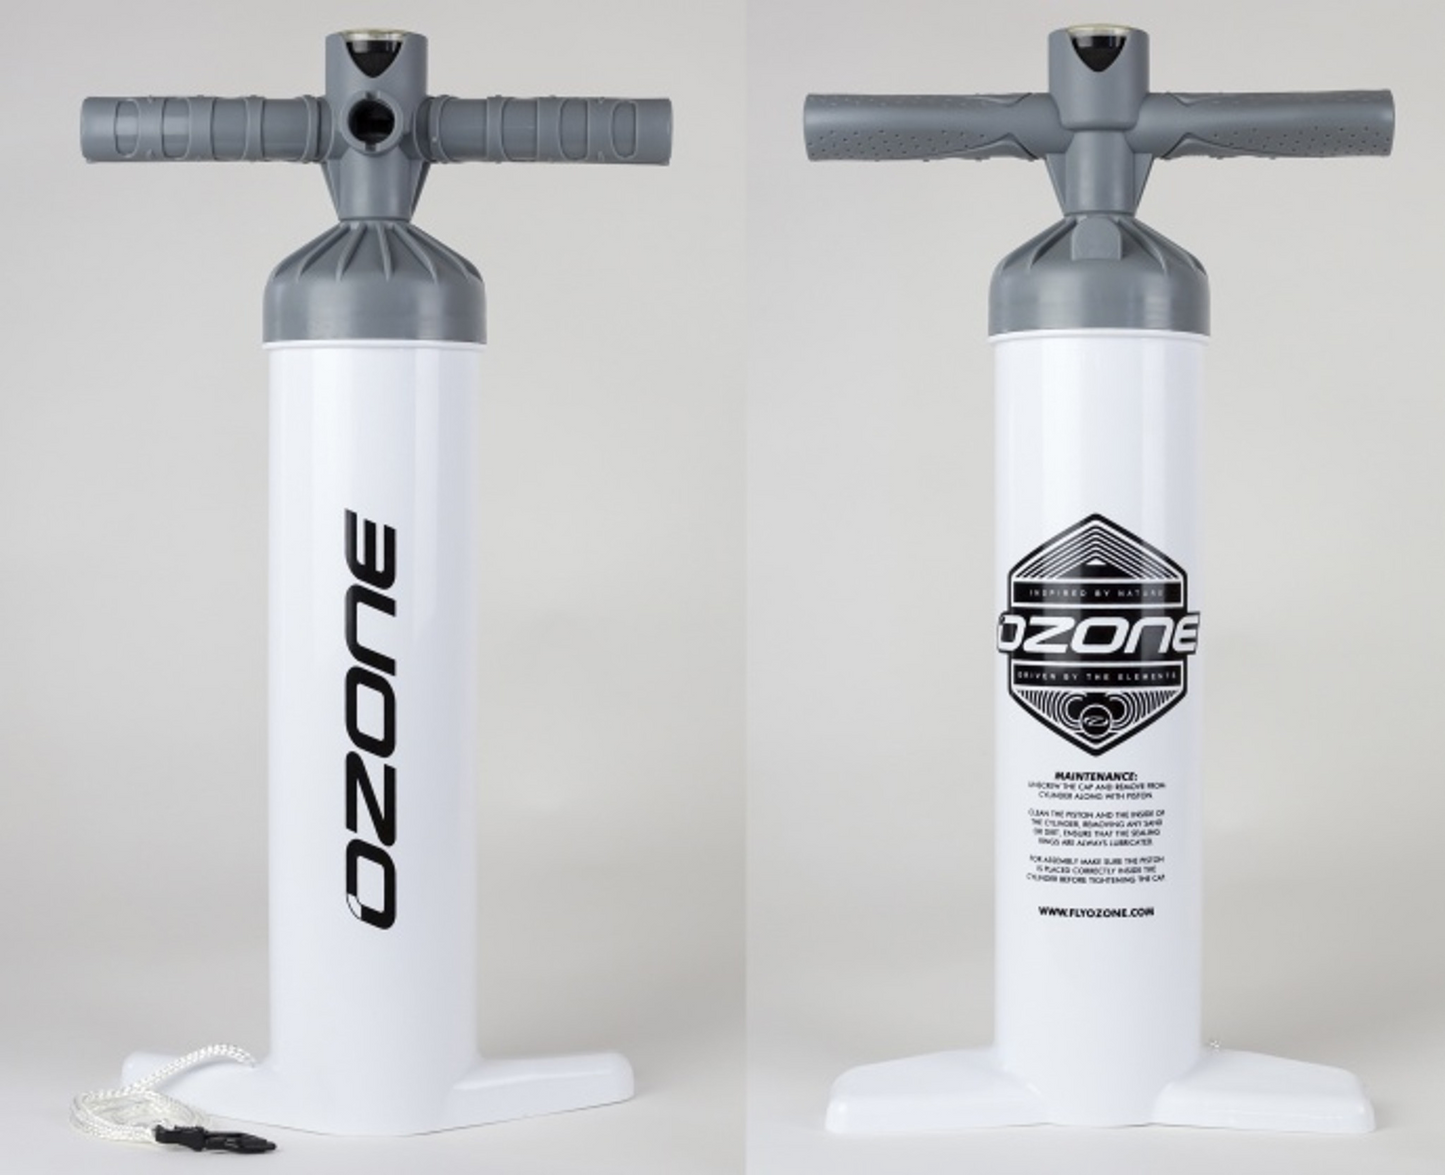 Ozone Heavy Duty Wing and Kite Pump